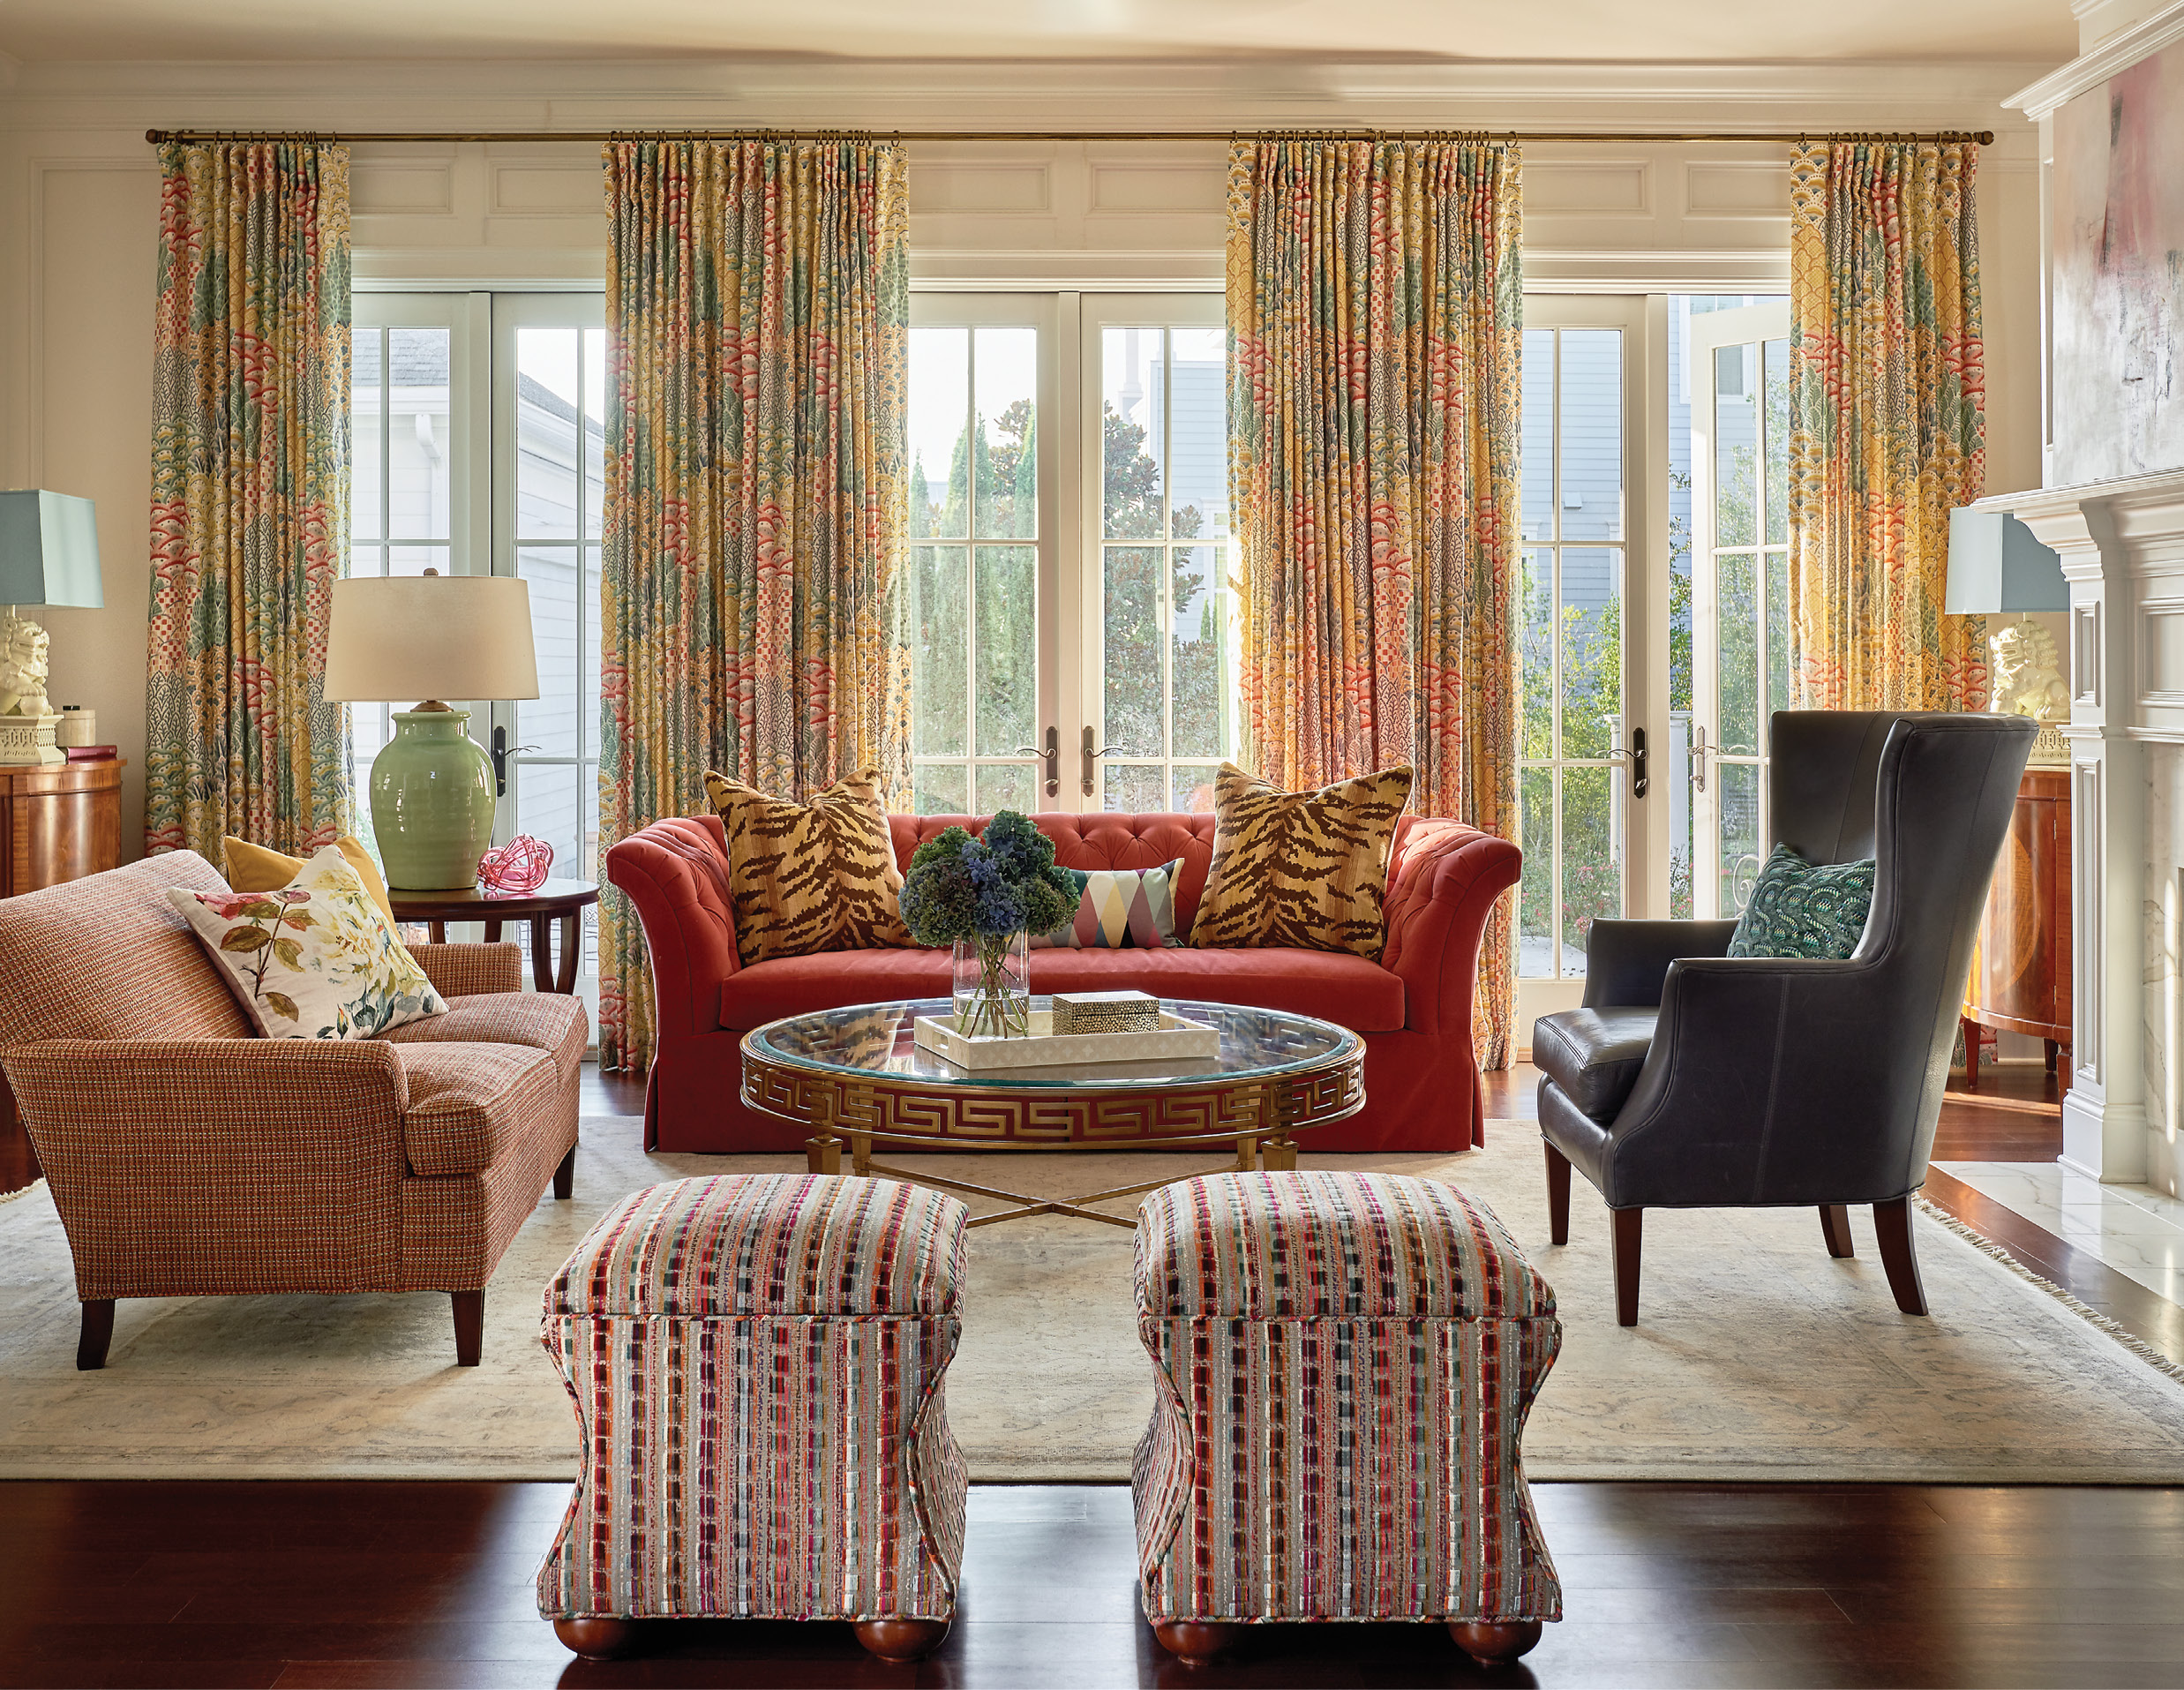 A tufted-velvet sofa and smaller settee in a soft, sophisticated tweed offer French flair in the family room, while still providing comfort for everyday family living. The bold colors are unified by bright drapes in the Clarence House “Shere Khan” fabric.